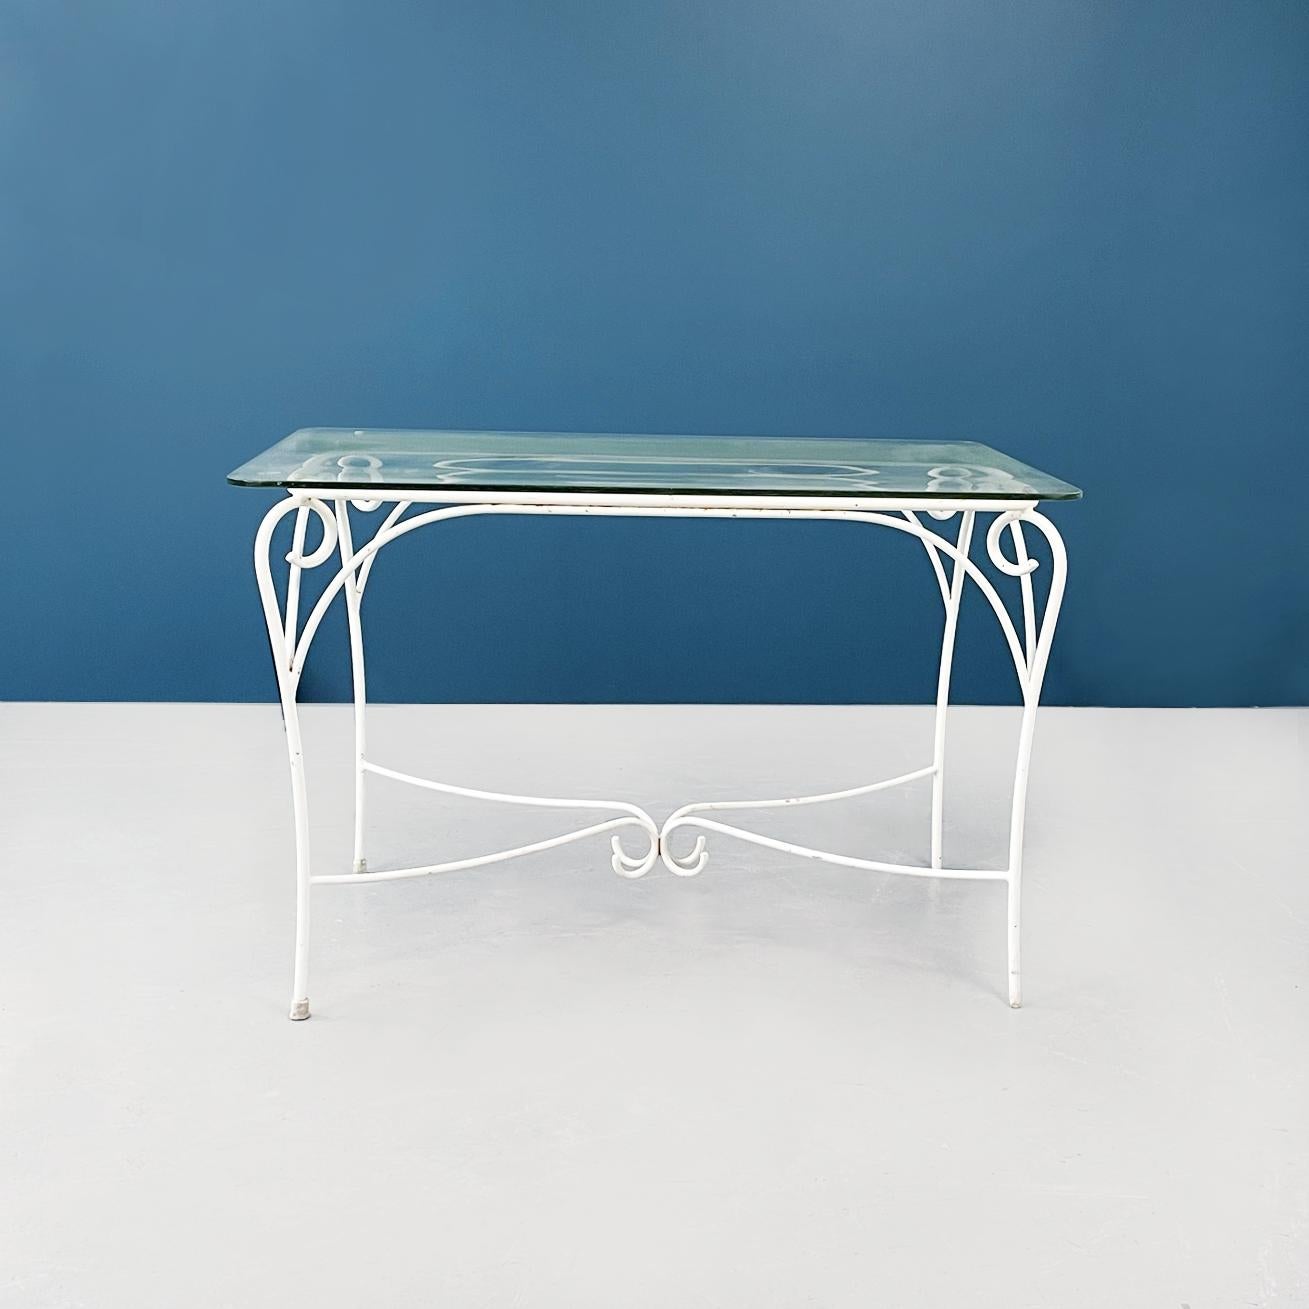 Italian mid-century garden table in white wrought iron and glass, 1960s.
Garden table in white painted wrought iron structure. The legs have decorative curls. The rectangular top in thick glass in aquamarine green has rounded corners and rests on